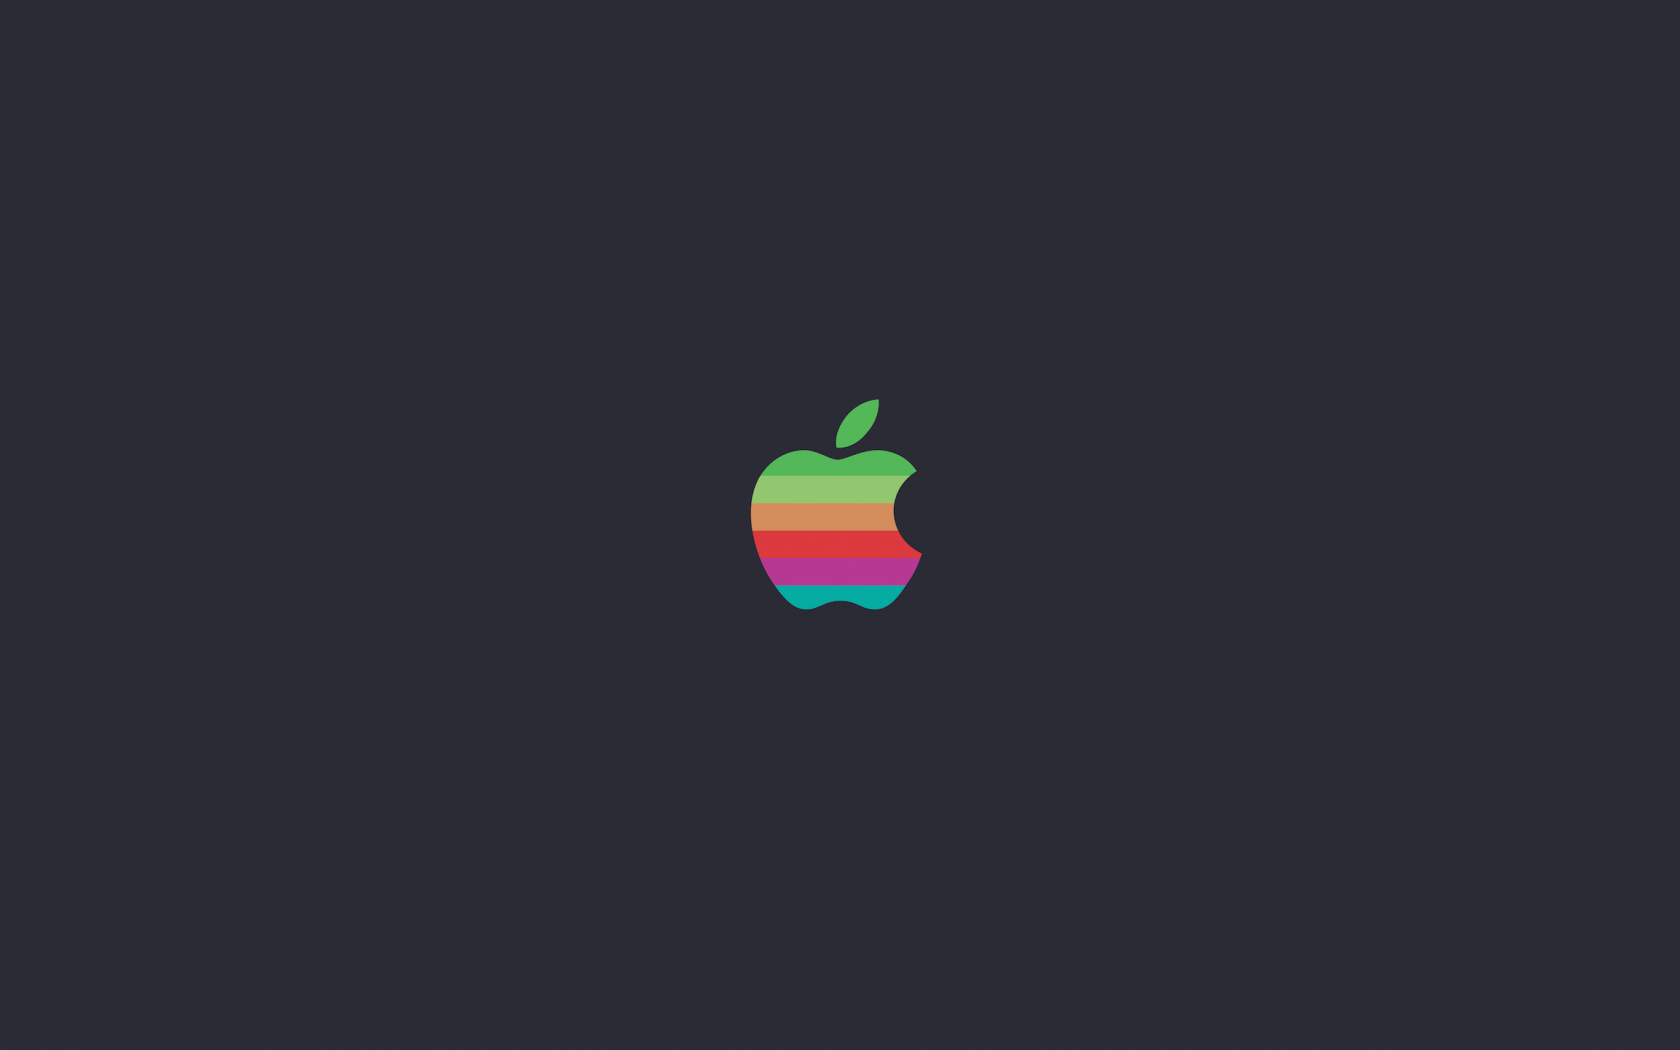 Old Apple Logo Wallpapers - Top Free Old Apple Logo Backgrounds ...